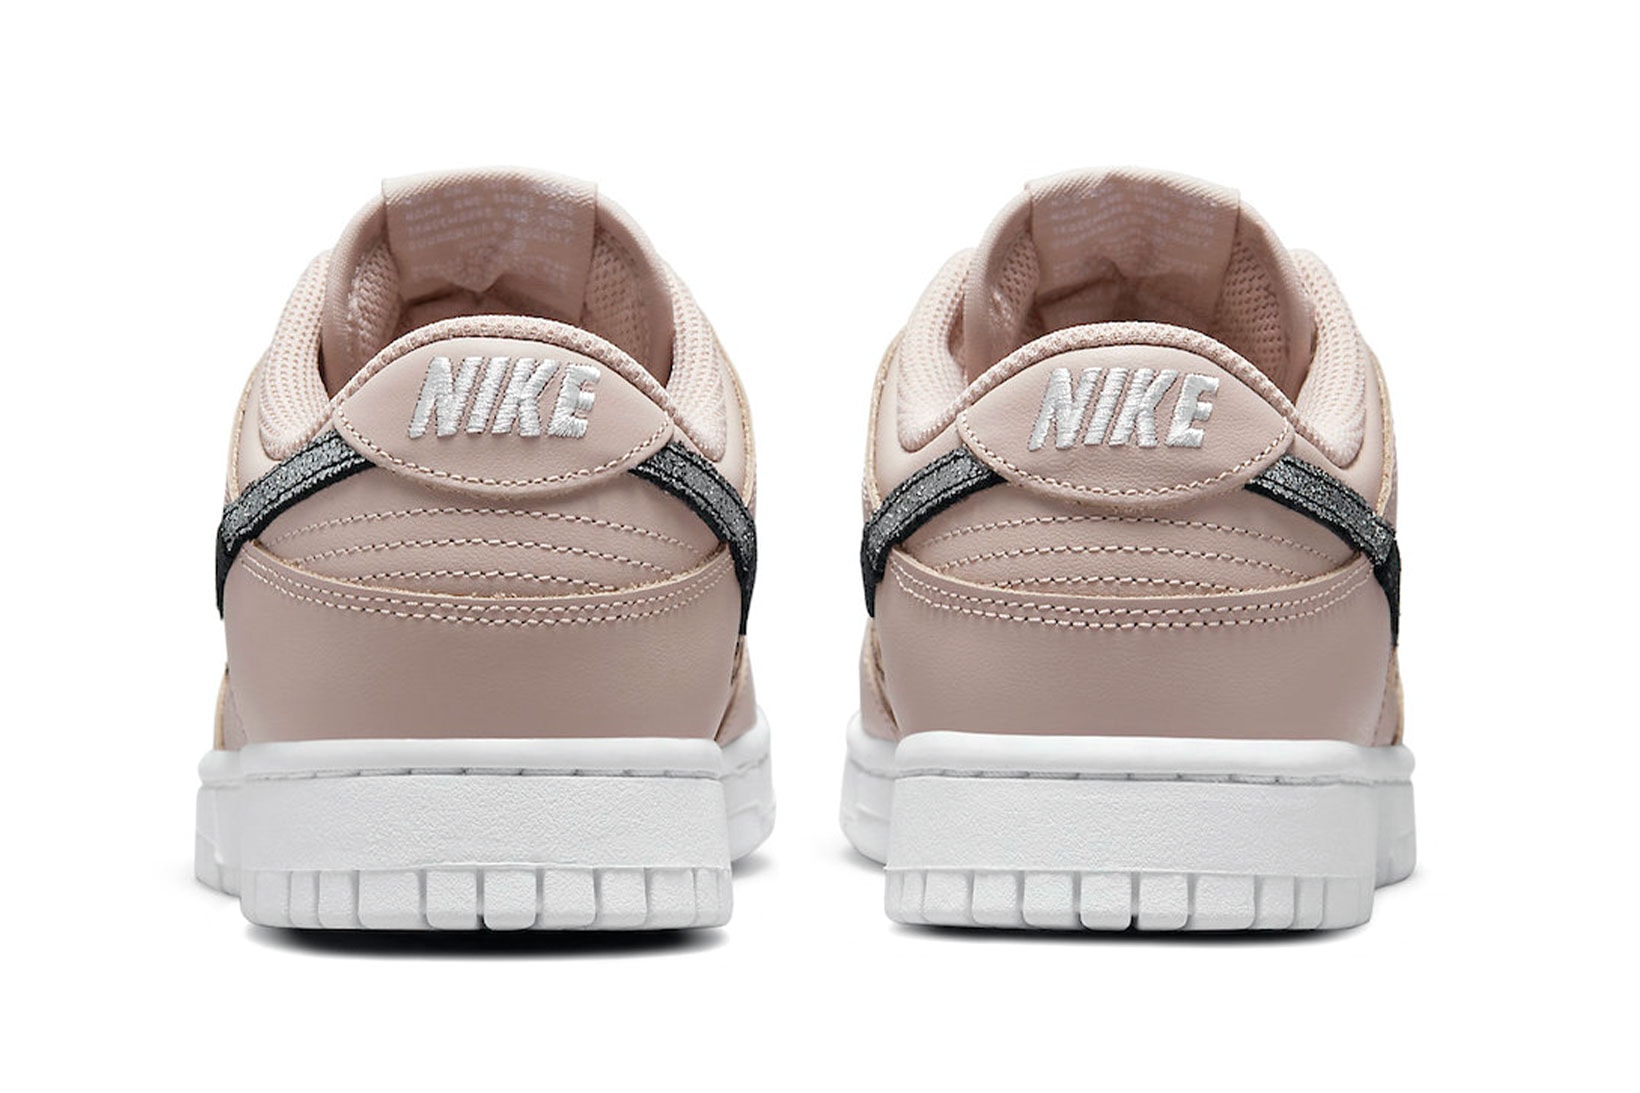 Nike Dunk Low "Animal Print" dusty pink back view